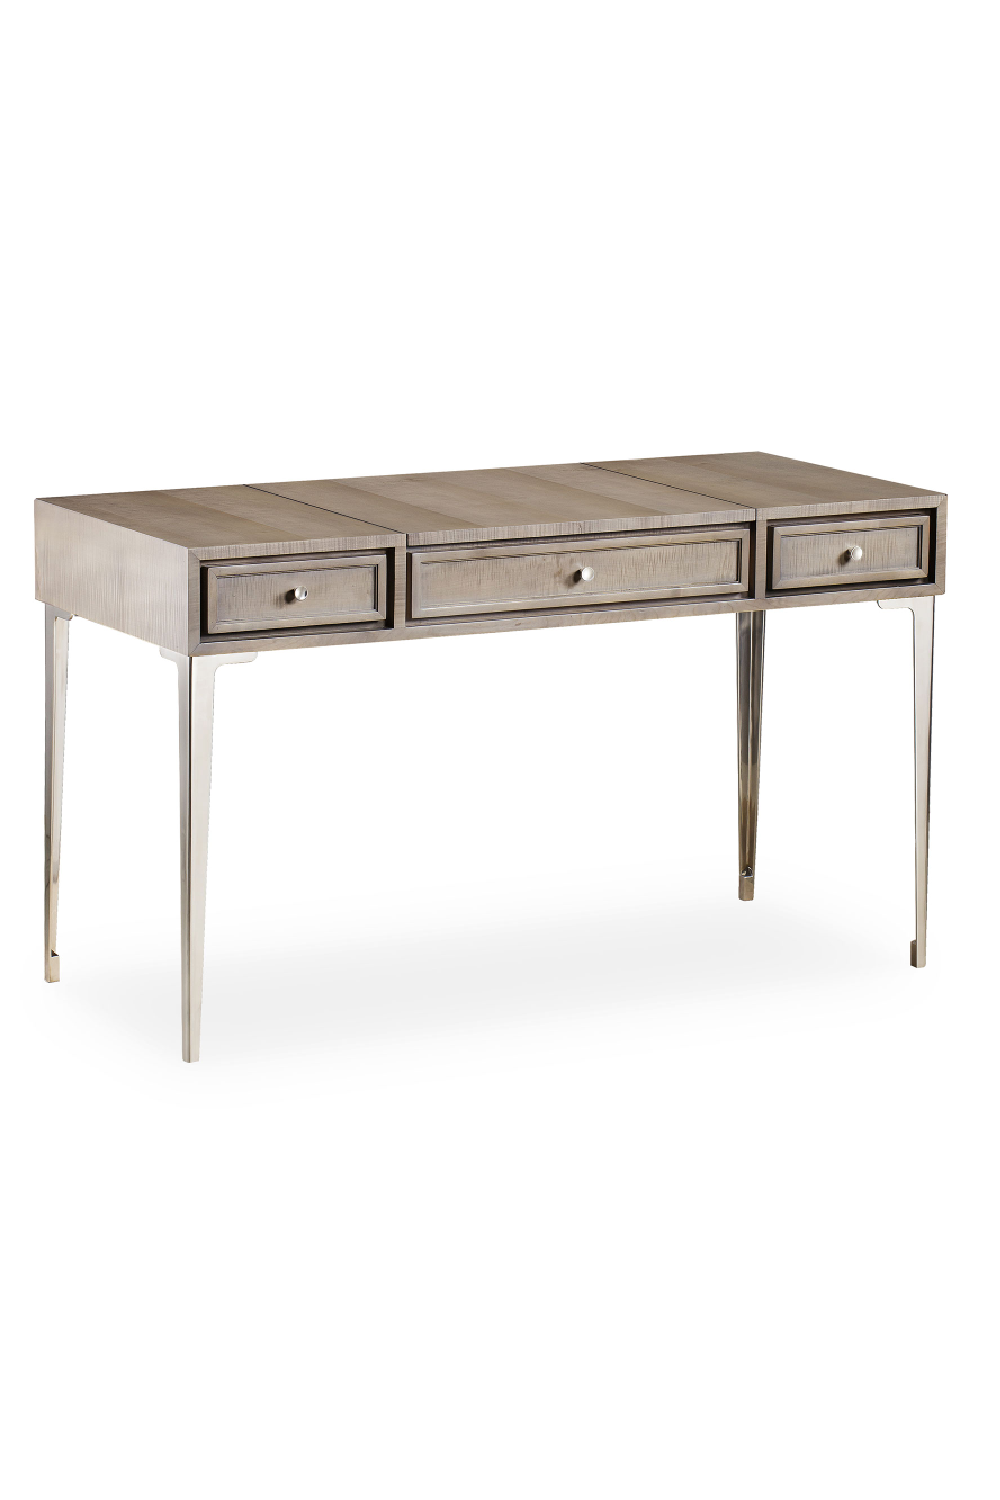 Mink Contemporary Dressing Table with Mirror | Andrew Martin | OROA.com